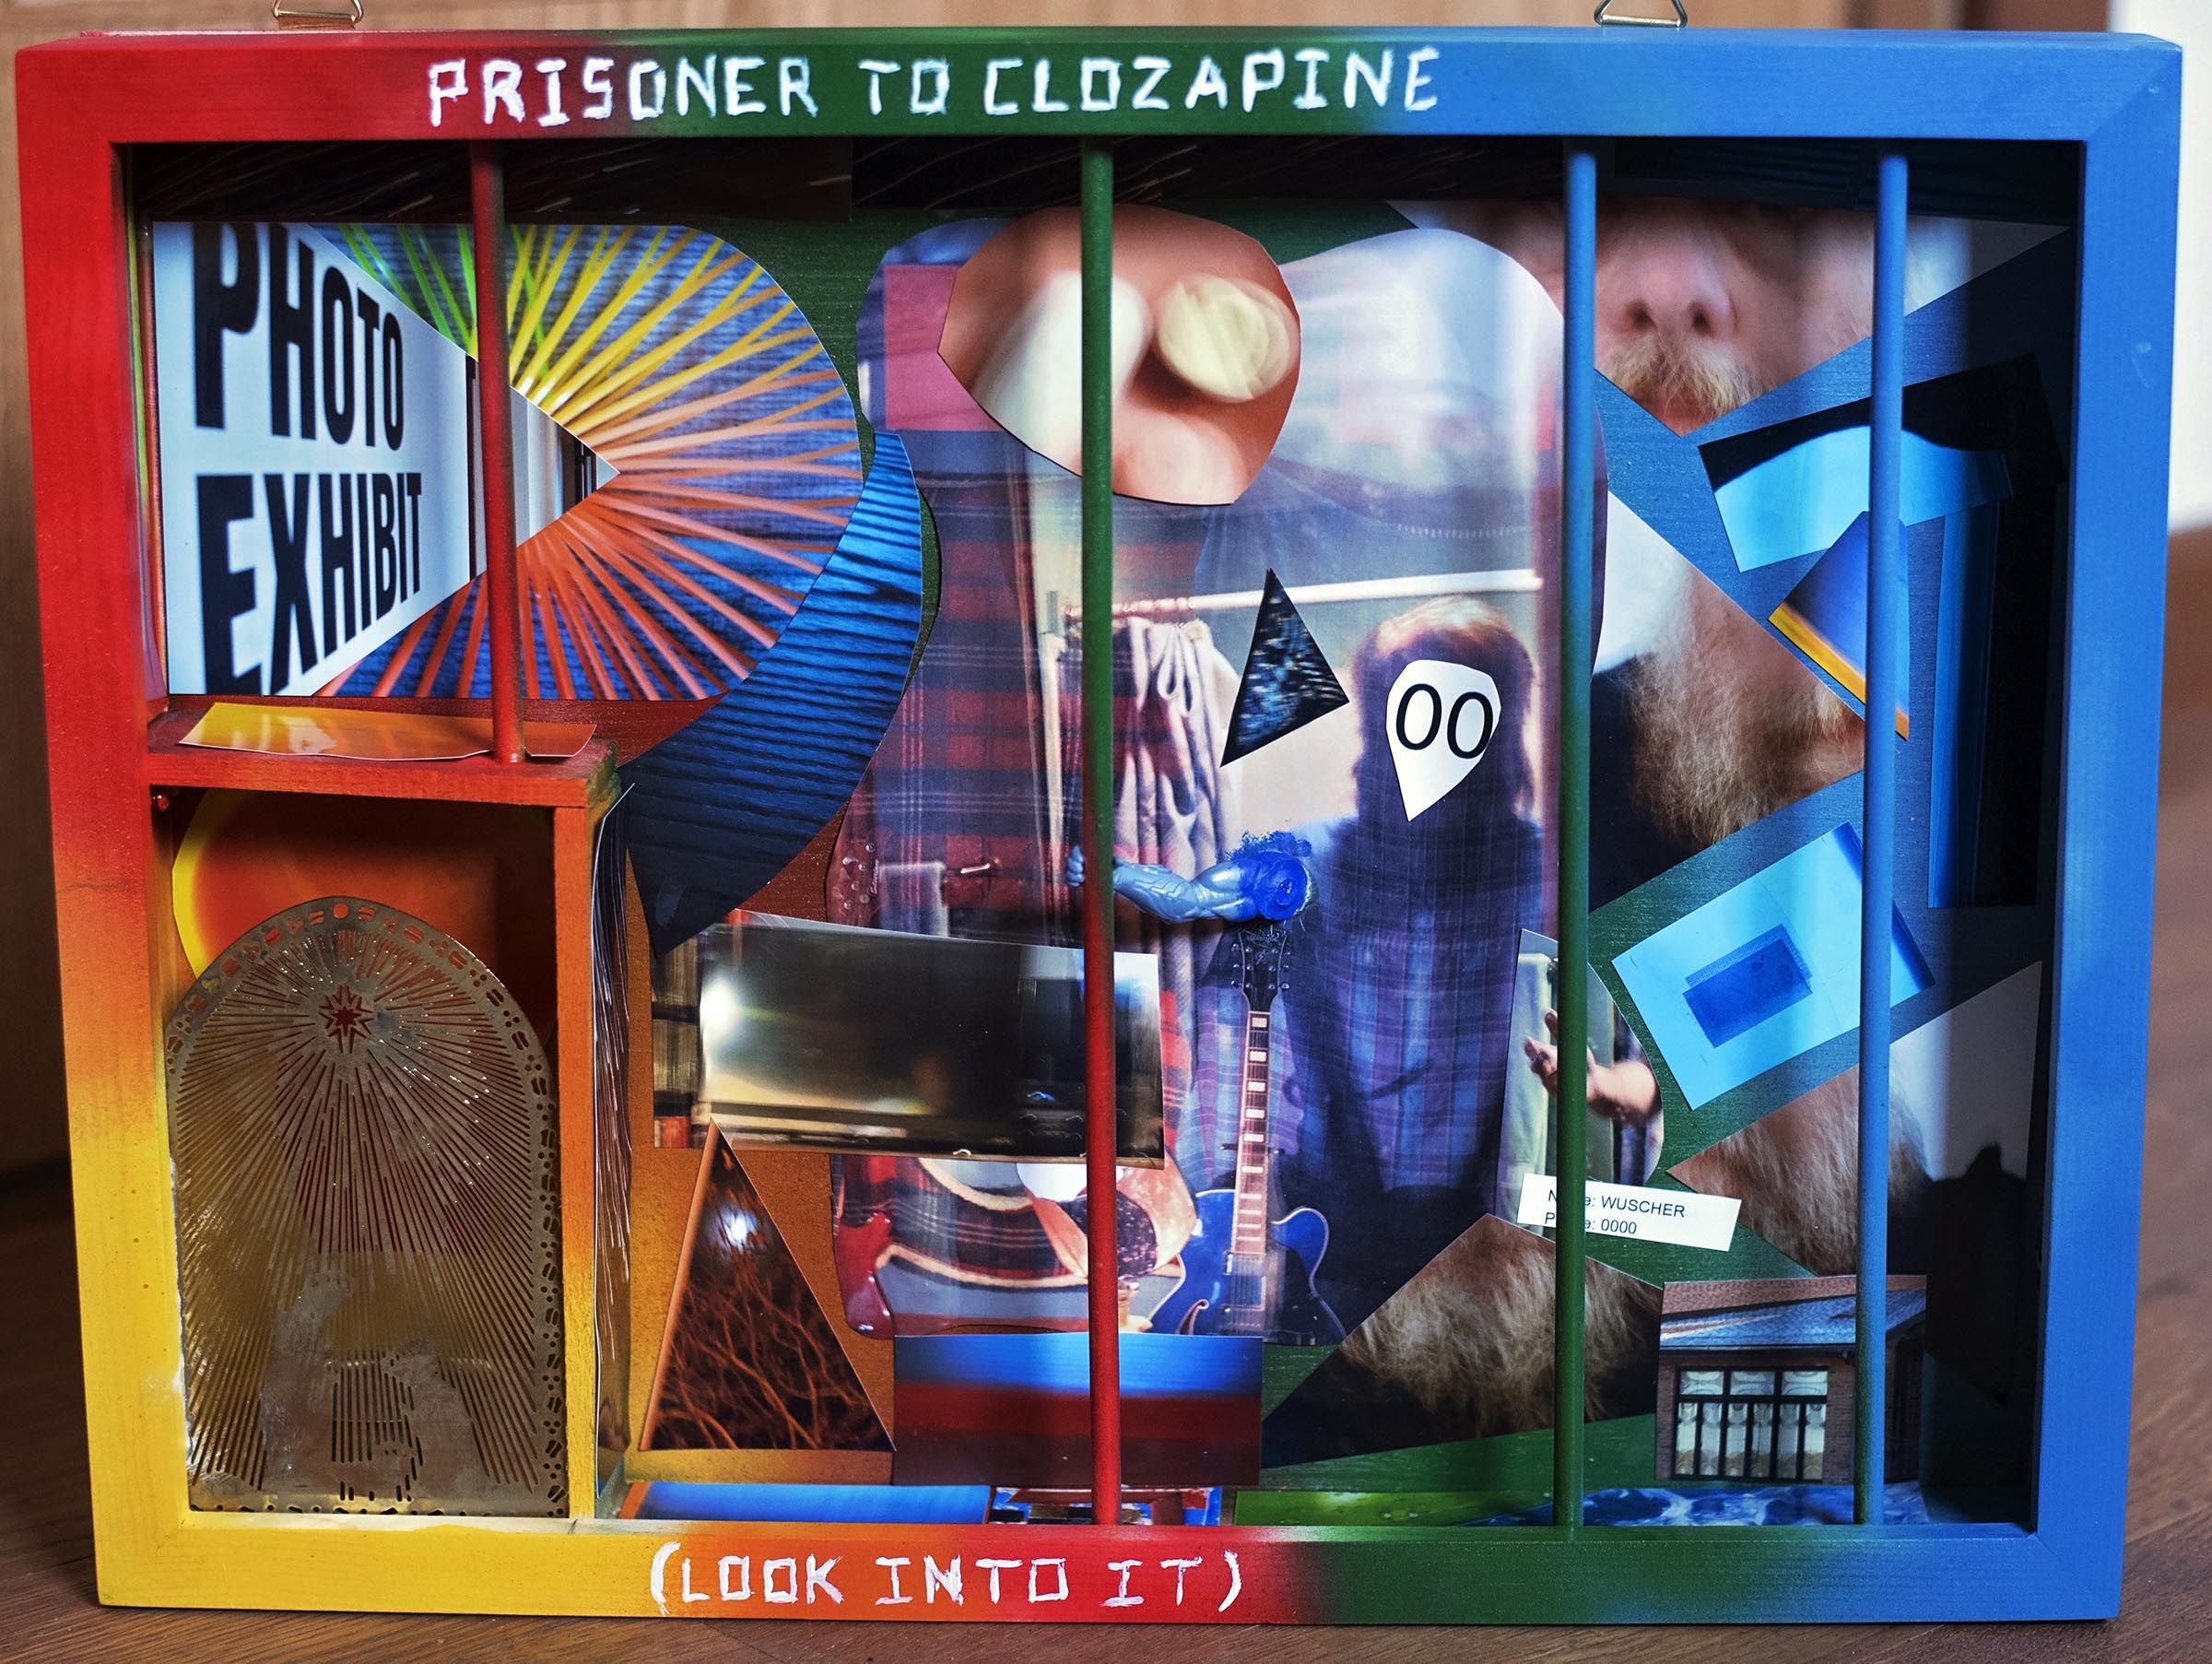 One of Pete's most recent pieces of artwork, depicting his drug dependency to the antipsychotic Clozapine, sits at The Athens Photographic Project.